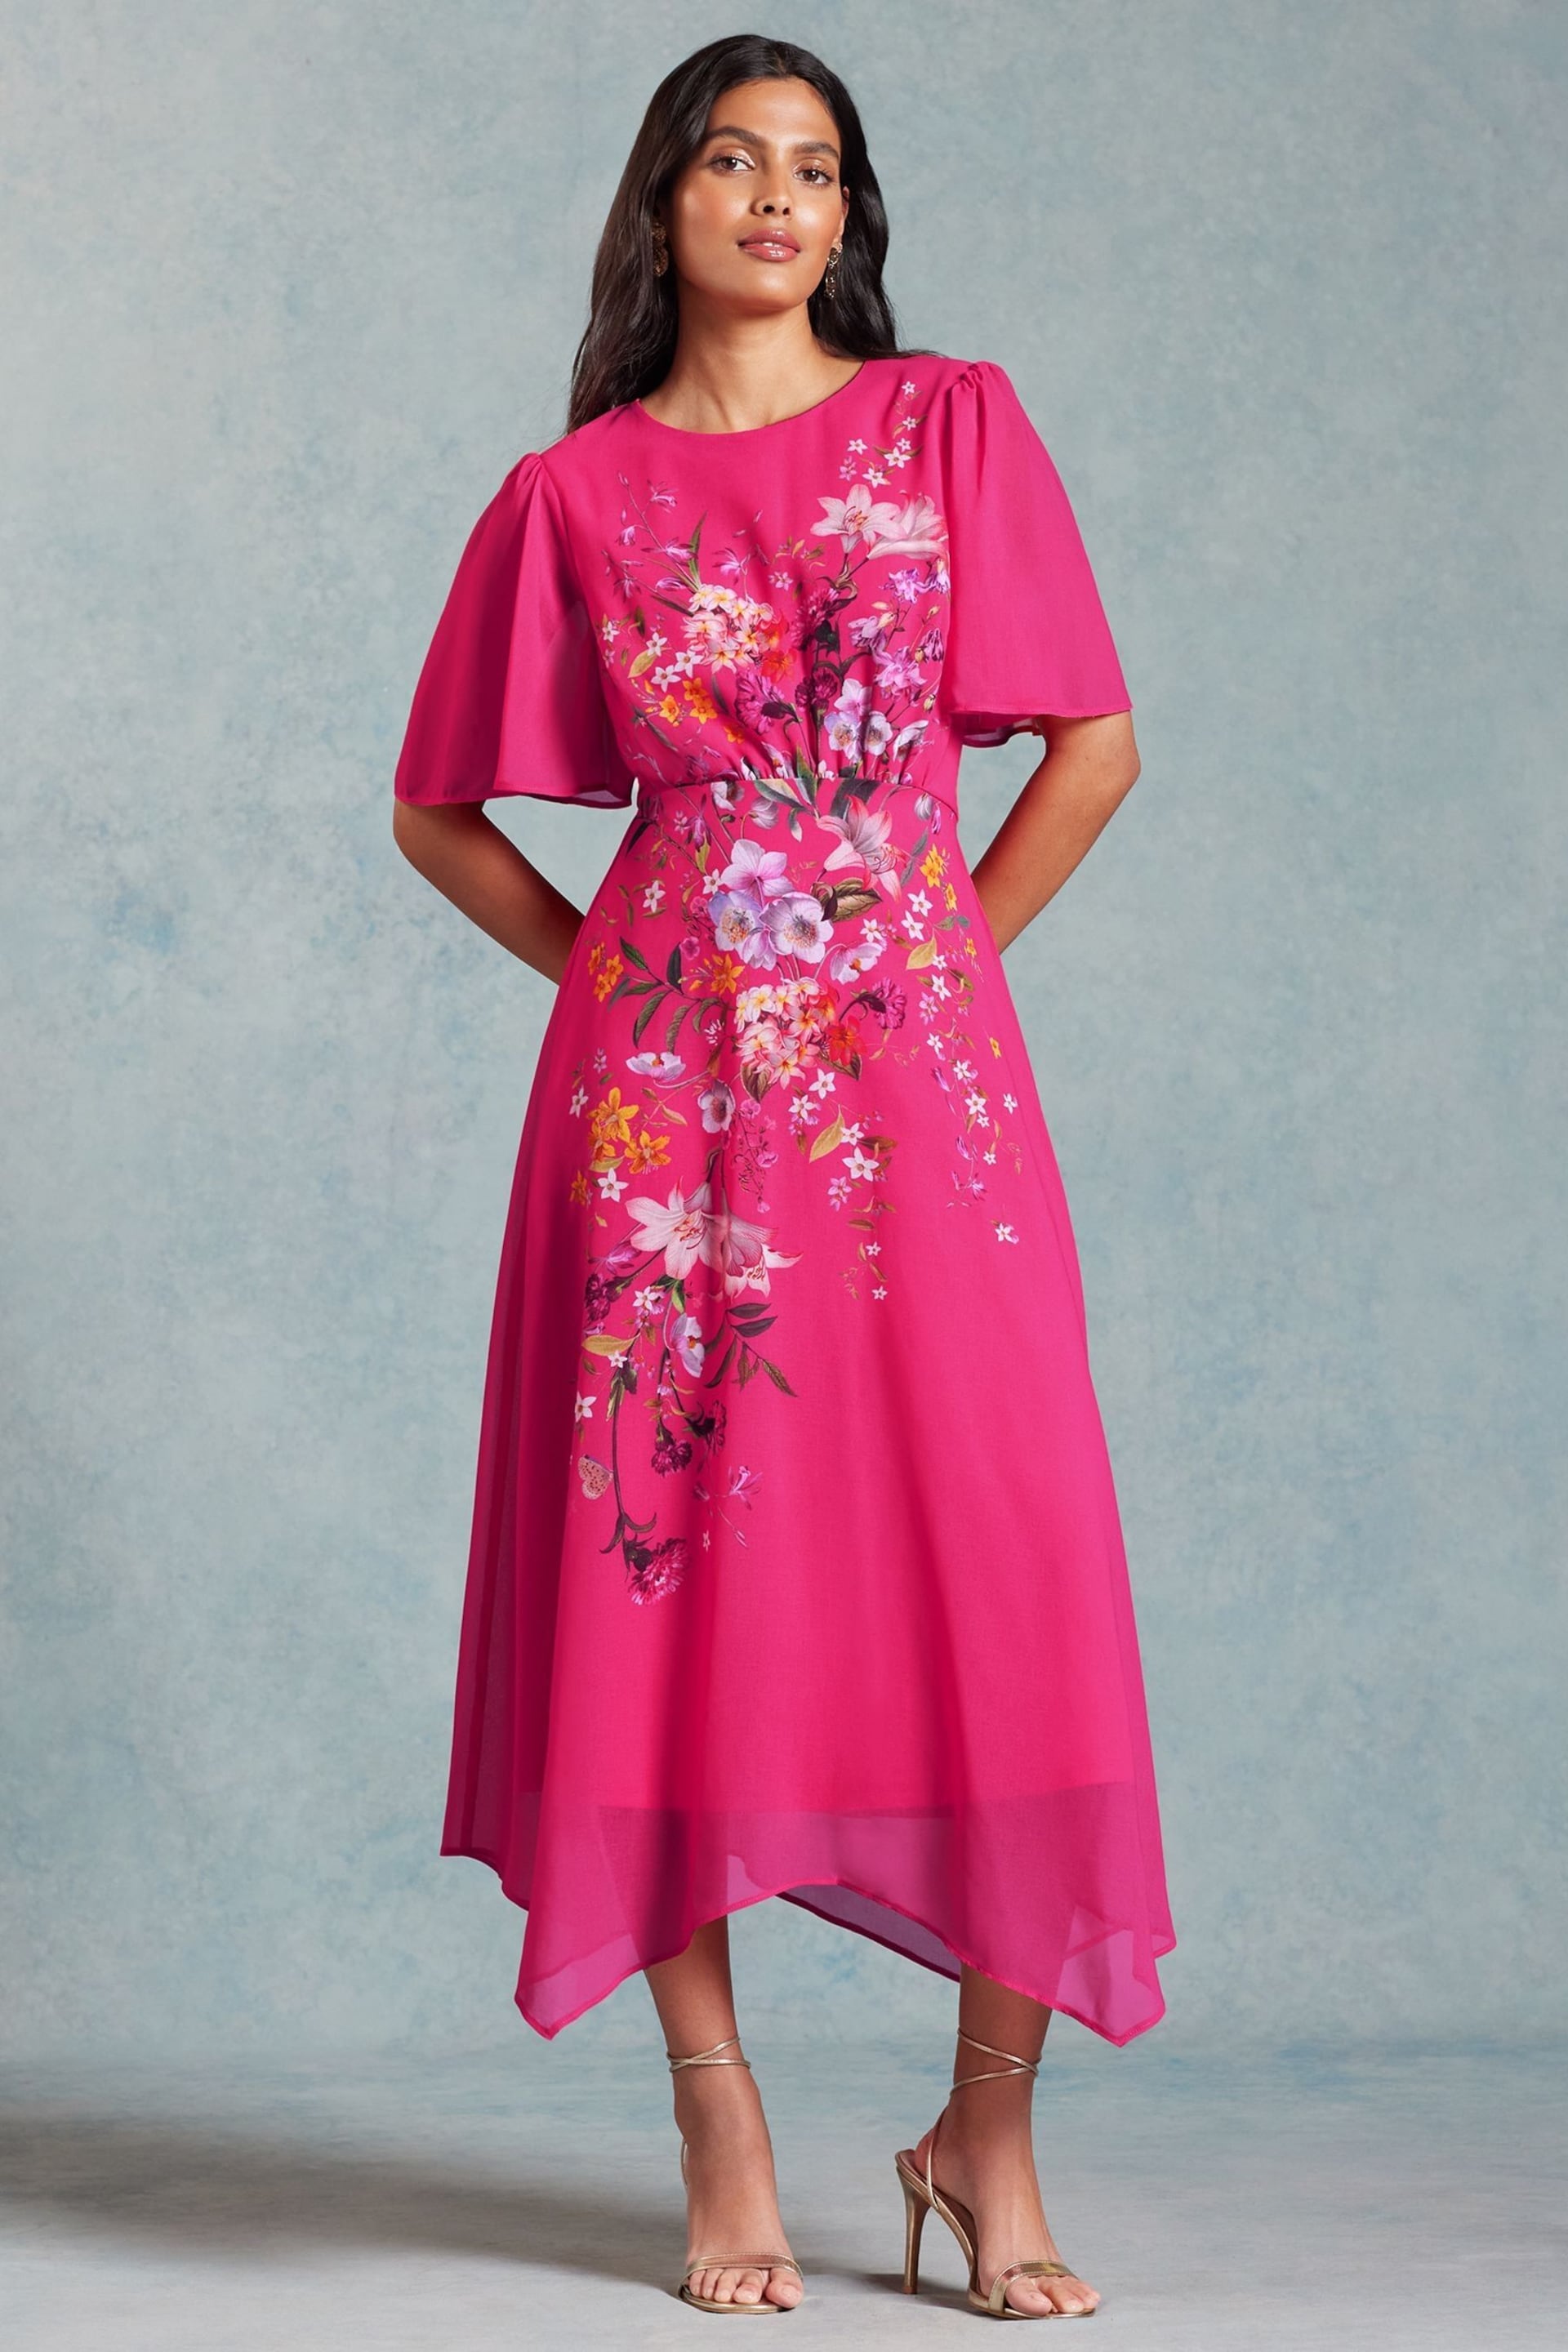 V&A | Love & Roses Pink Placement Print Flutter Sleeve Midi Dress - Image 1 of 4